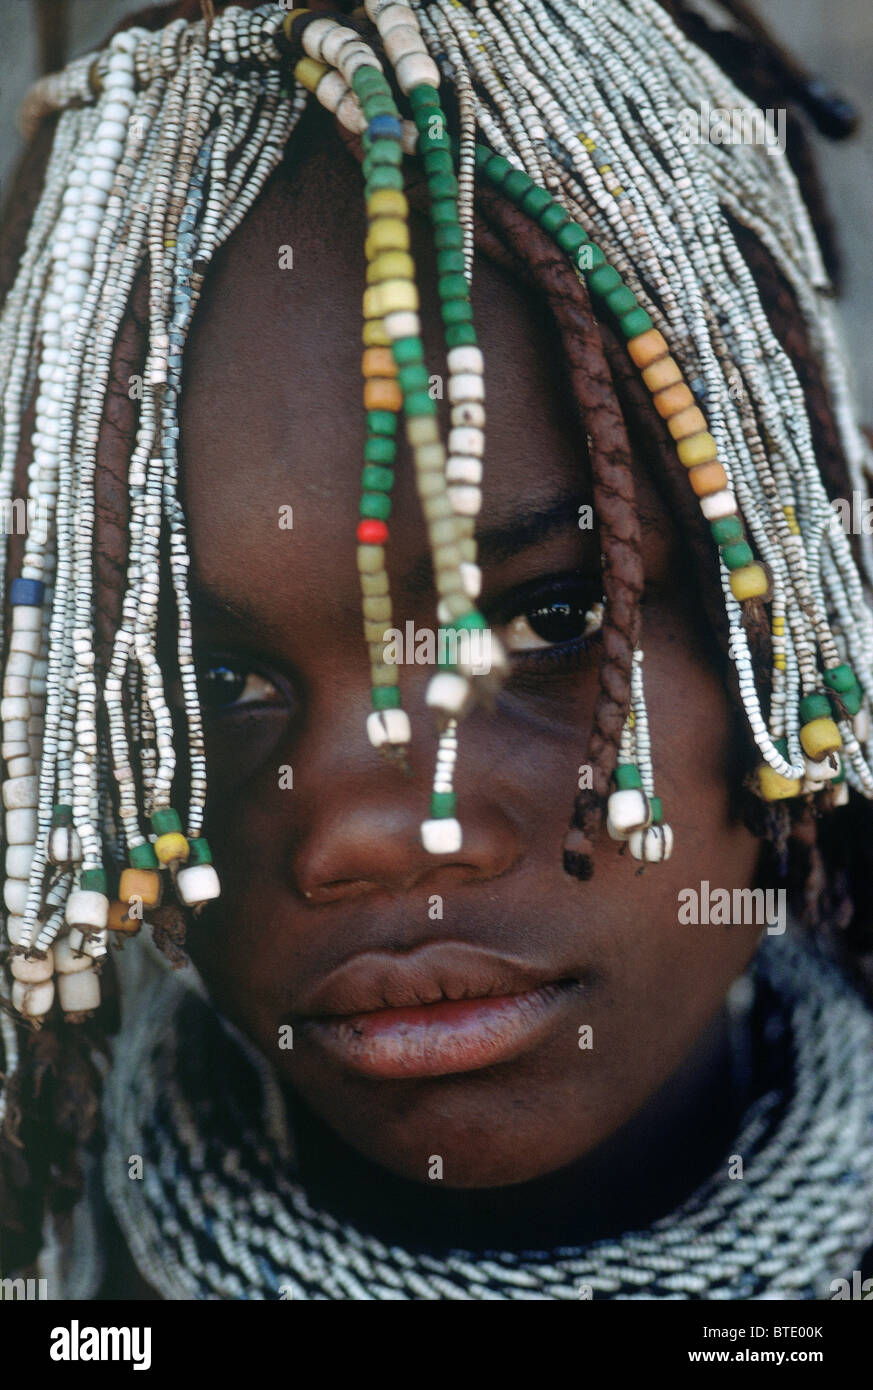 A portrait of a Himba girl with traditional beads braided into her hair  Stock Photo - Alamy